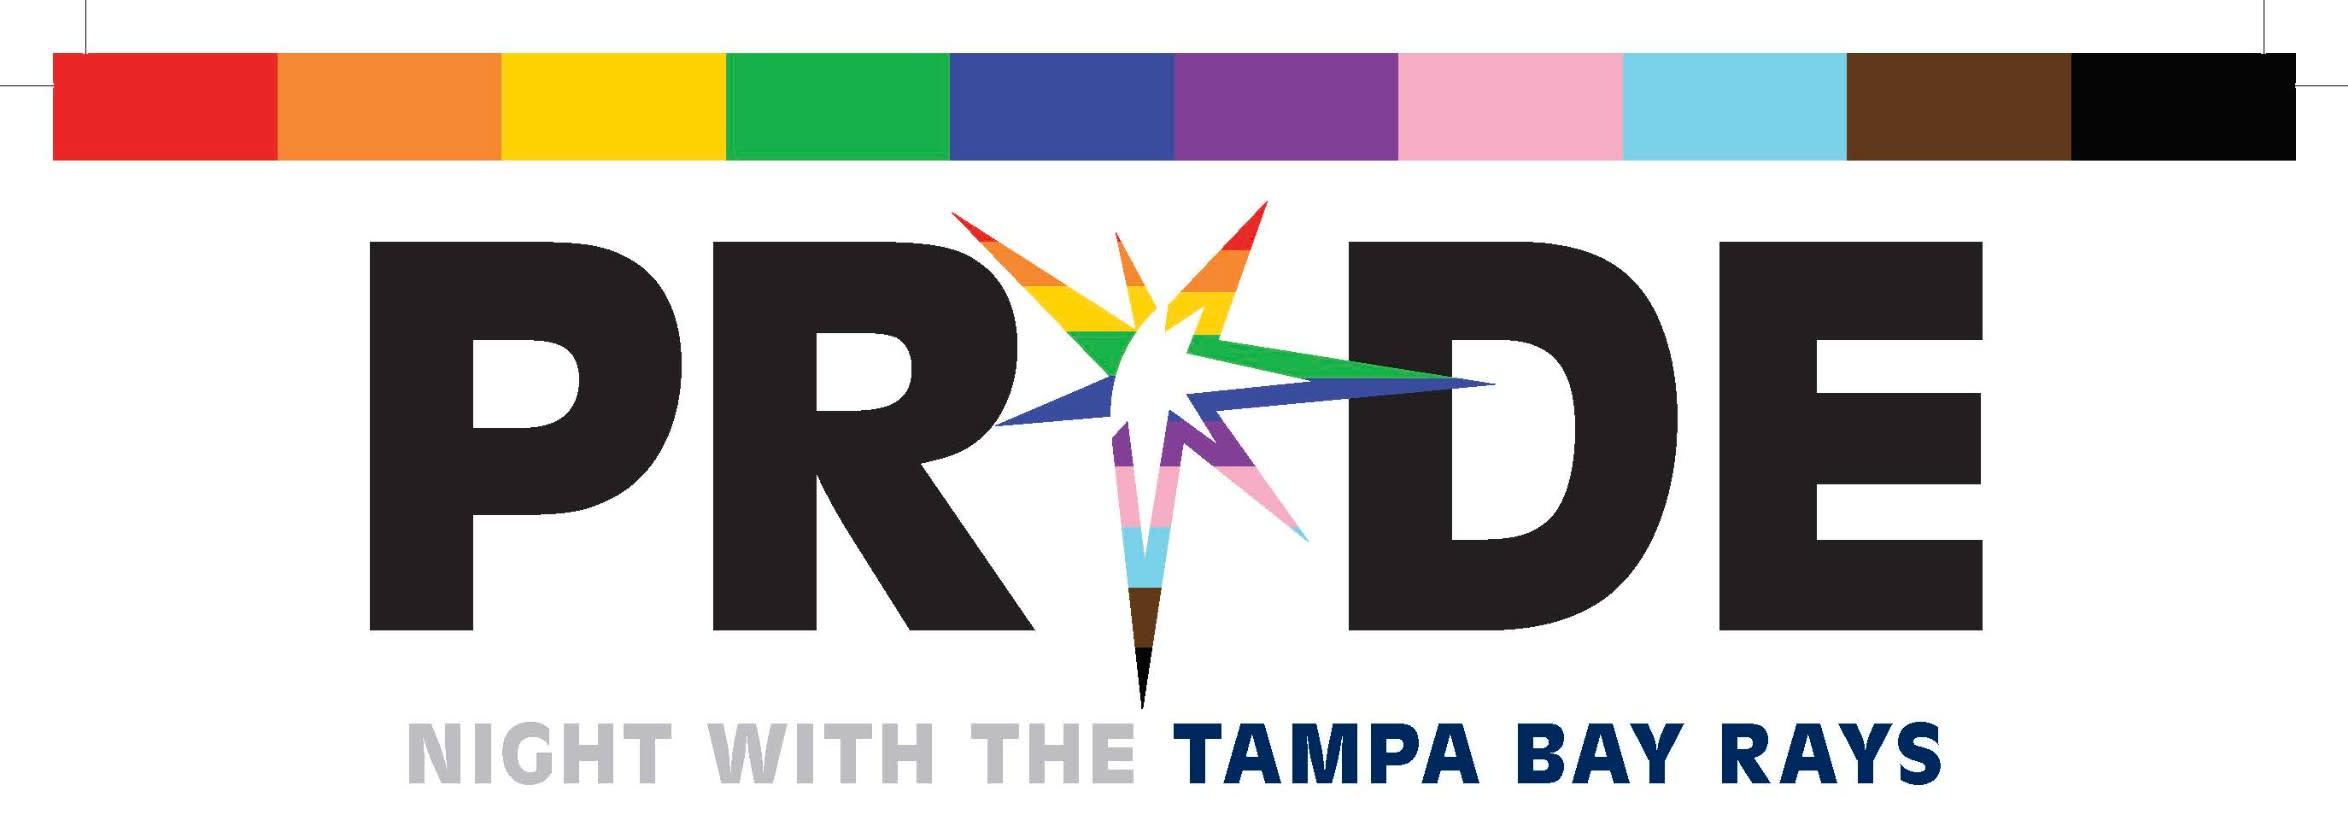 Tampa Bay Rays to hold 17th annual Pride Night - Watermark Online